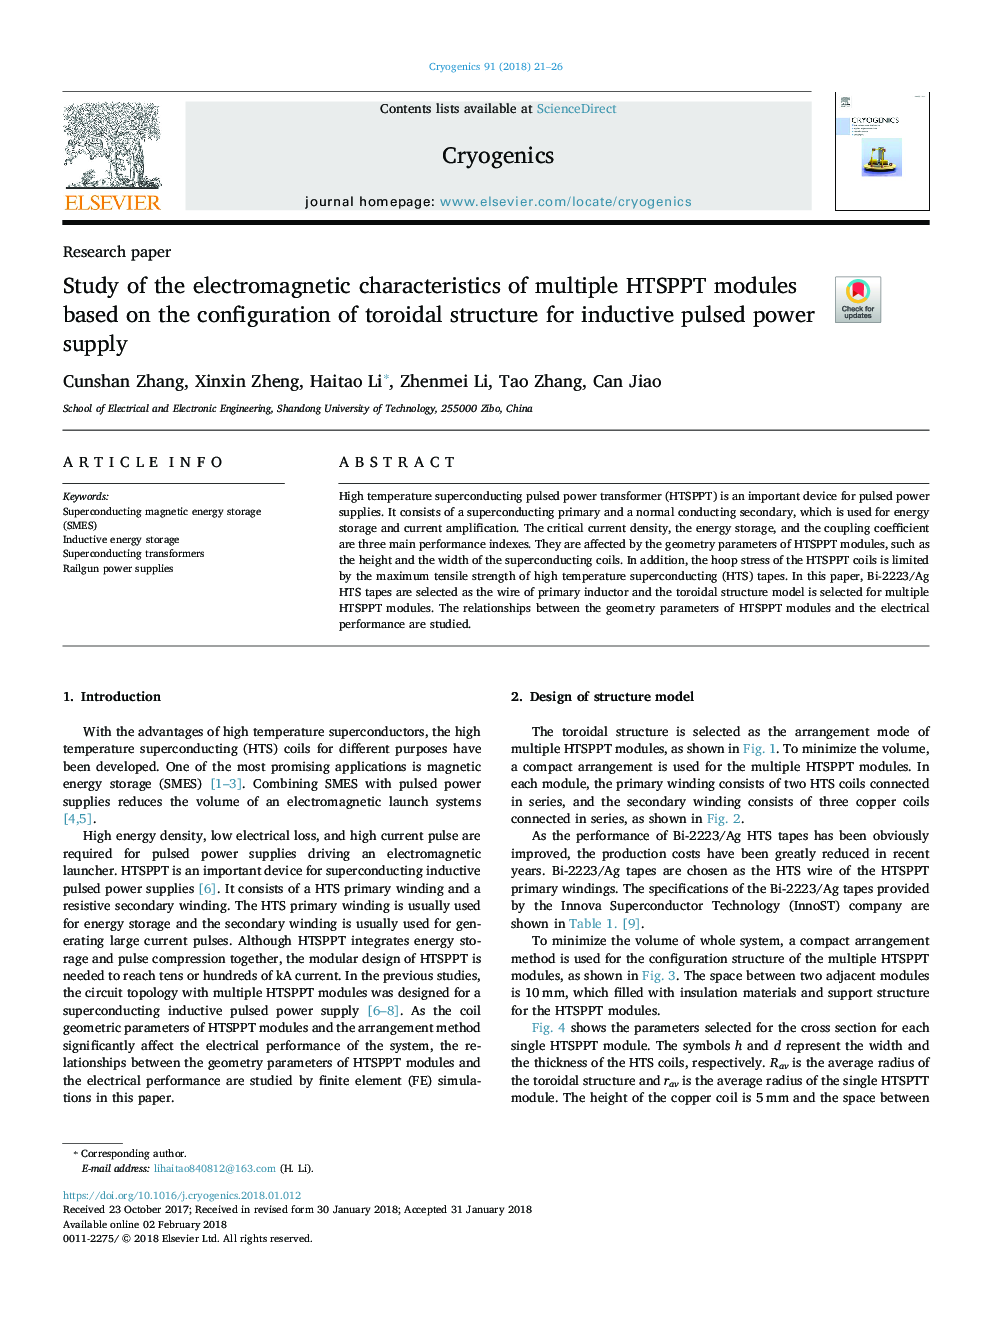 Study of the electromagnetic characteristics of multiple HTSPPT modules based on the configuration of toroidal structure for inductive pulsed power supply